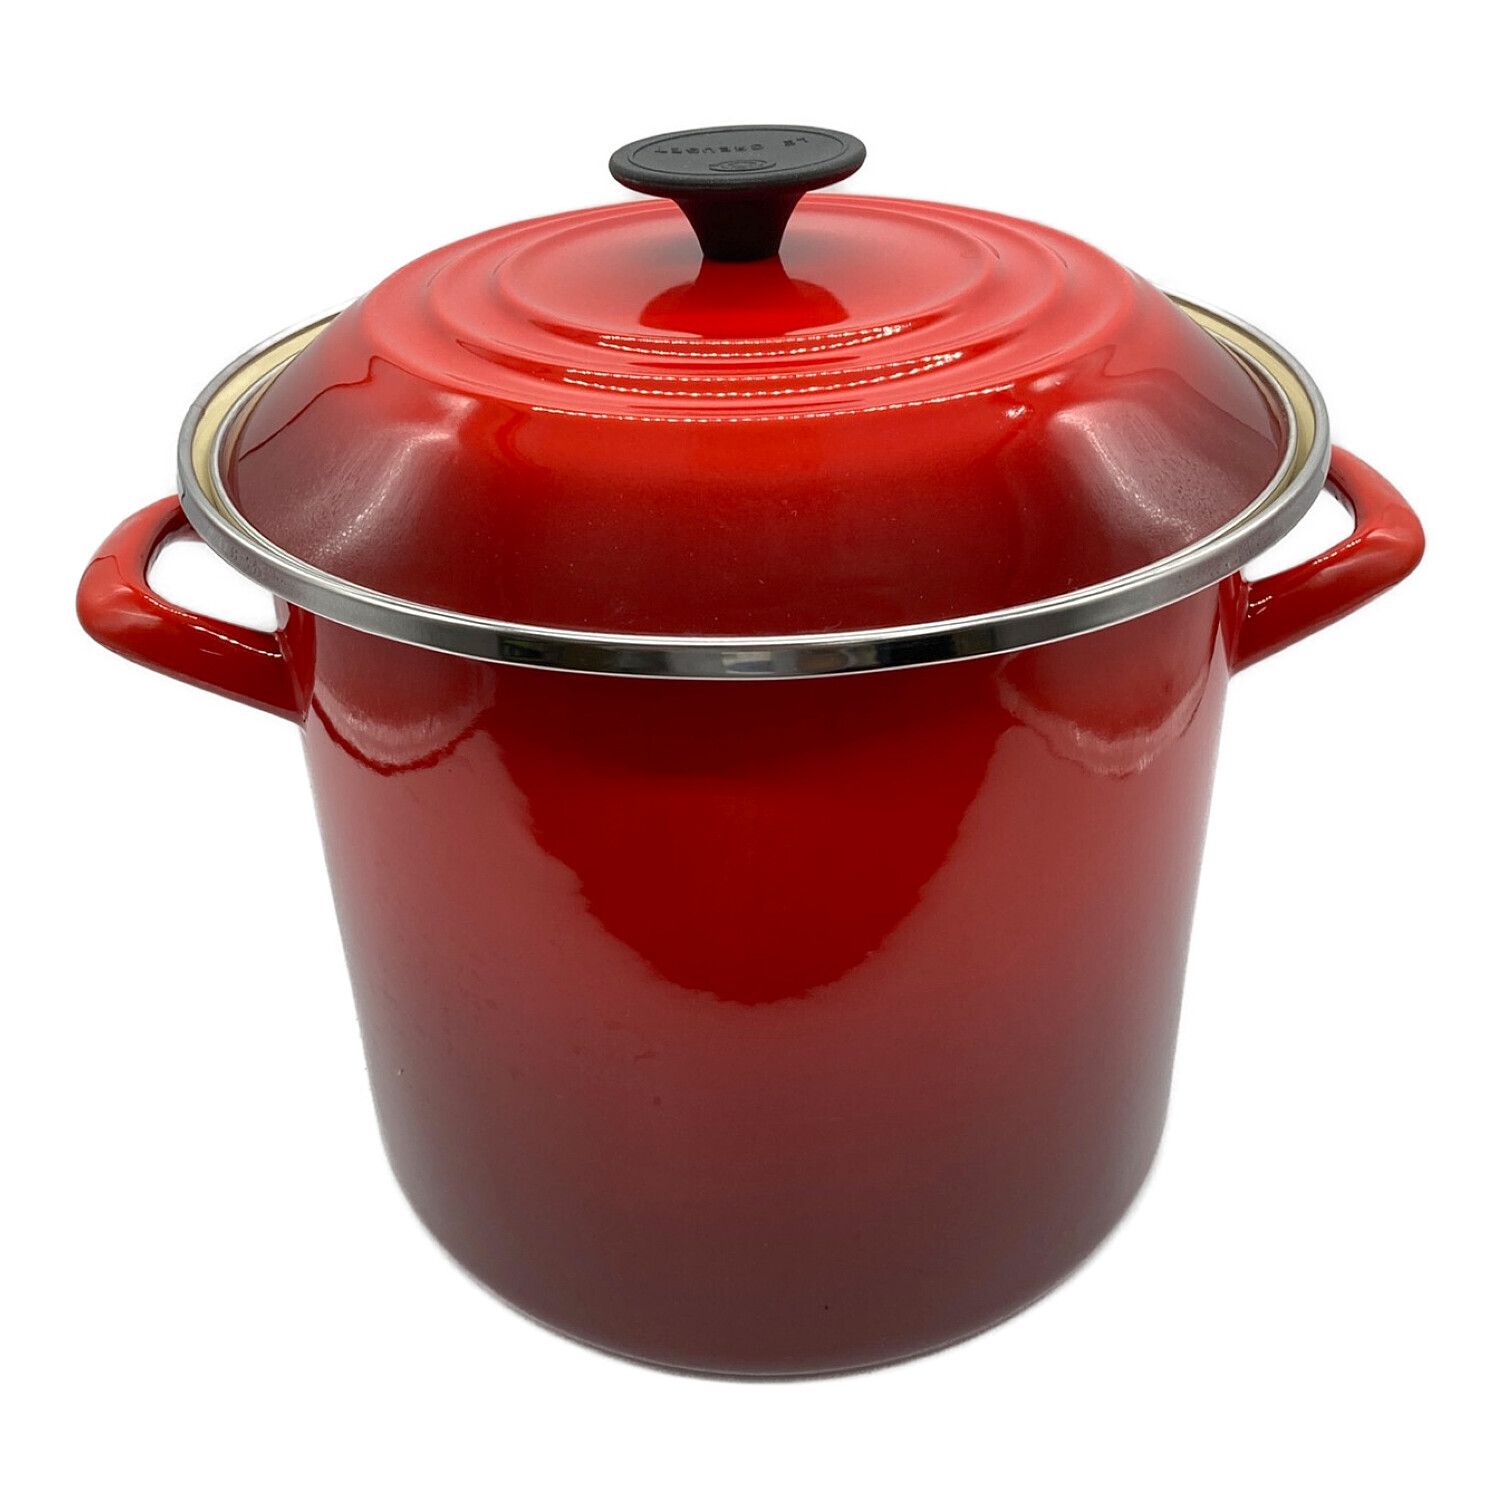 LE CREUSET (ルクルーゼ) 両手鍋 レッド ストックポット｜トレファクONLINE